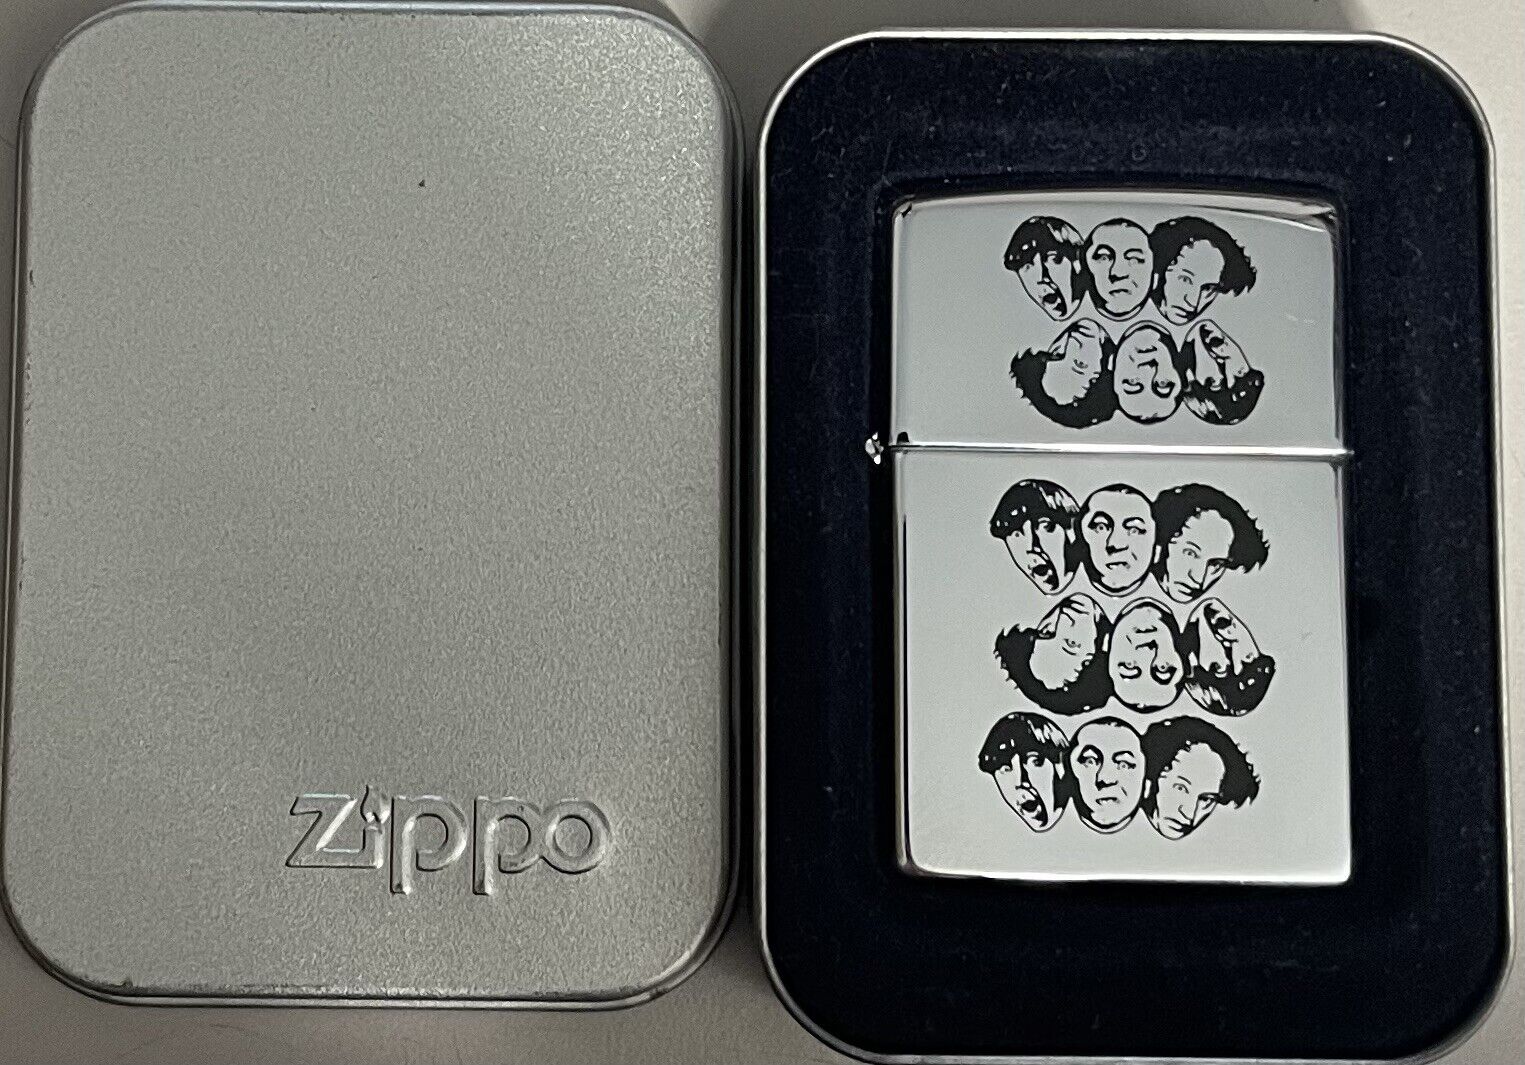 ZIPPO 1998 THREE STOOGES MULTIPLES POLISHED CHROME LIGHTER SEALED IN BOX 578F